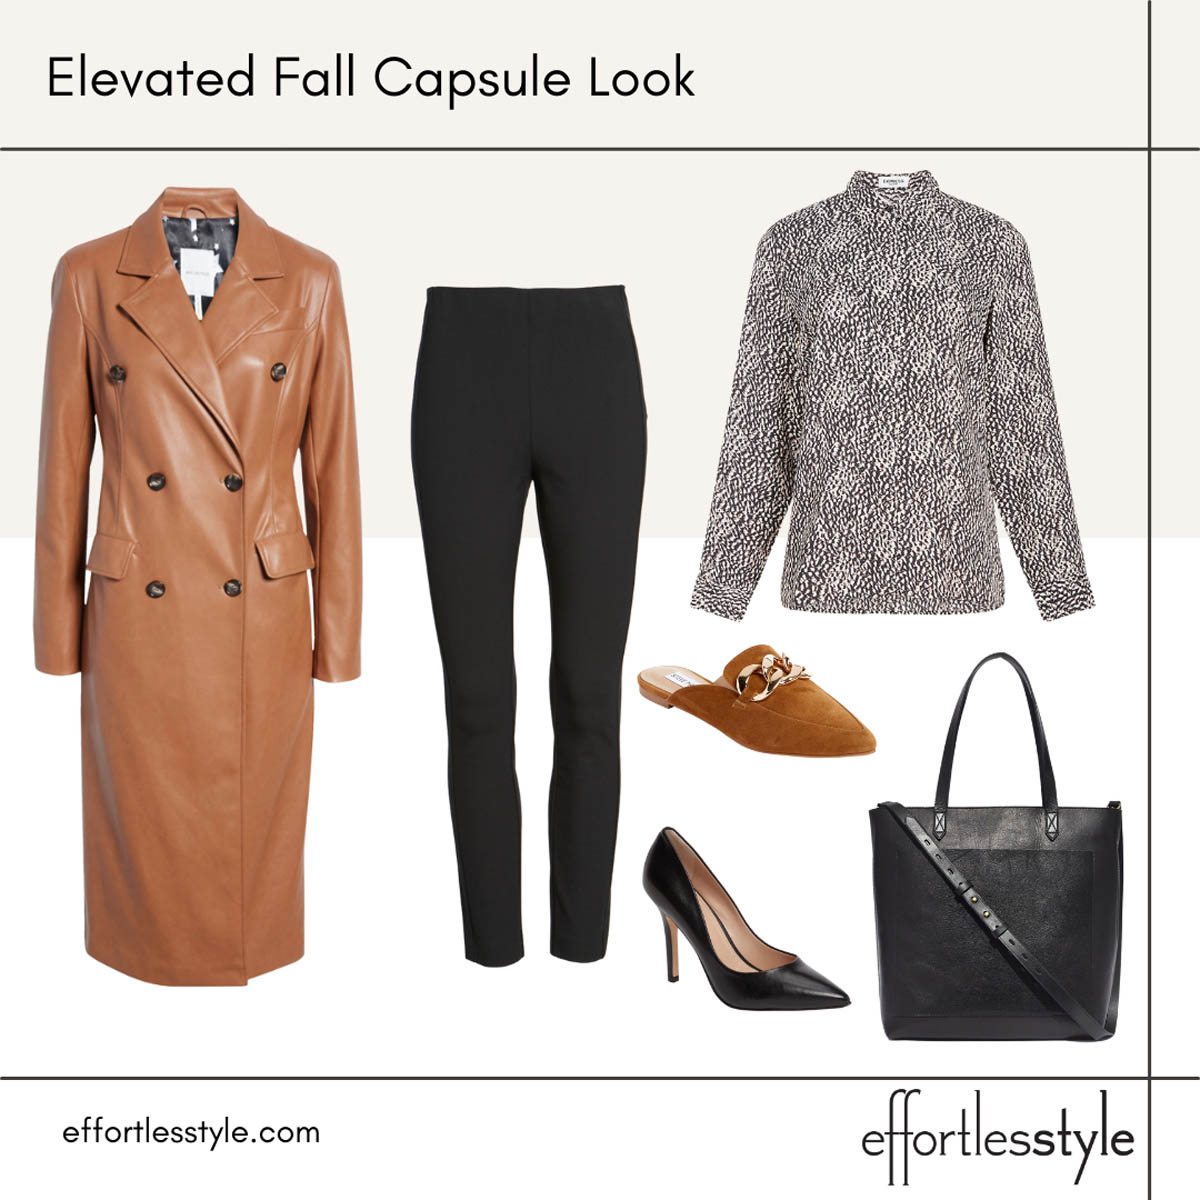 Faux Leather Trench & Ankle Pants Outfit What to Wear to the Office